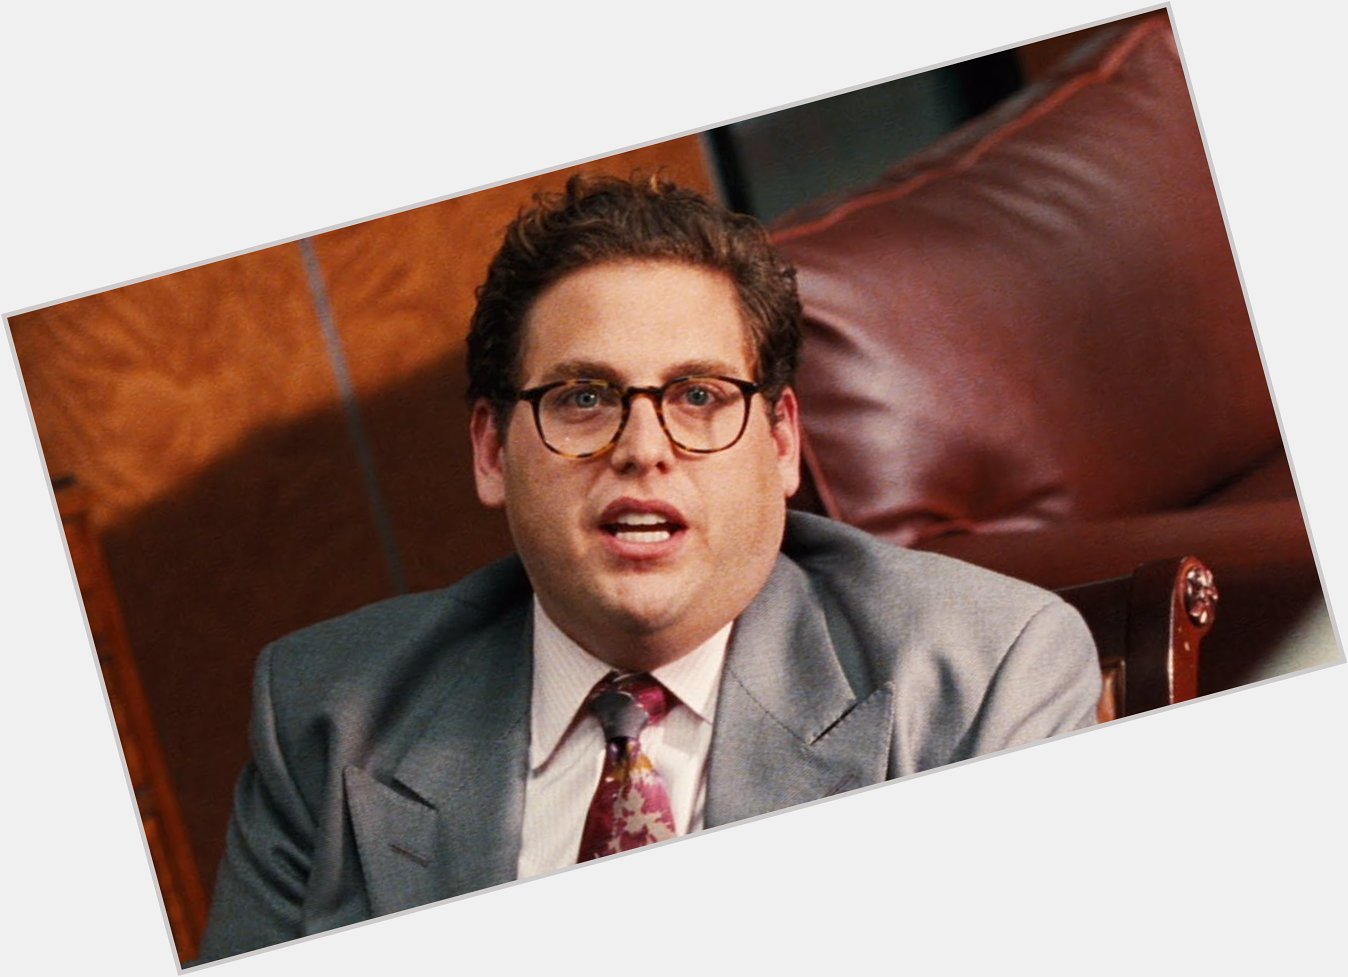 Happy birthday to the good actor,Jonah Hill,he turns 35 years today       